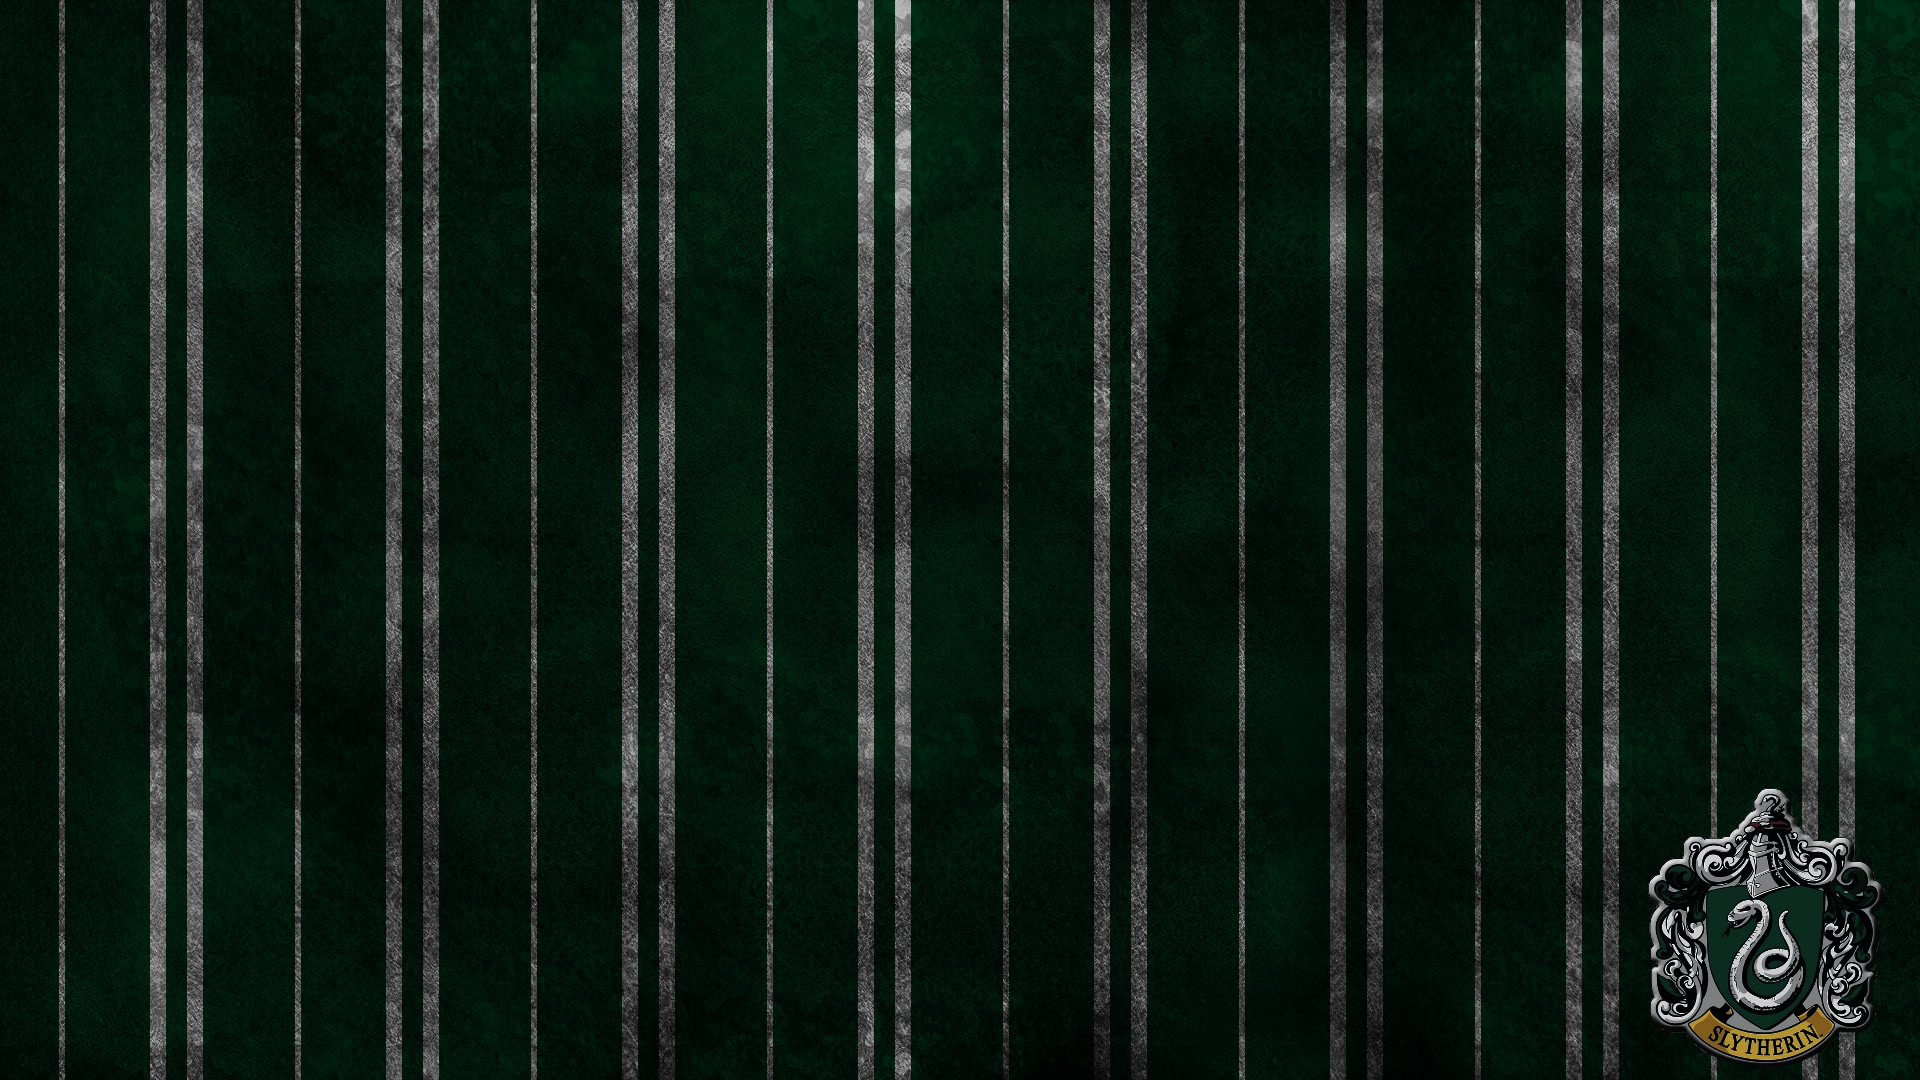 1920x1080 slytherin wallpapers hd stay | staywallpaper